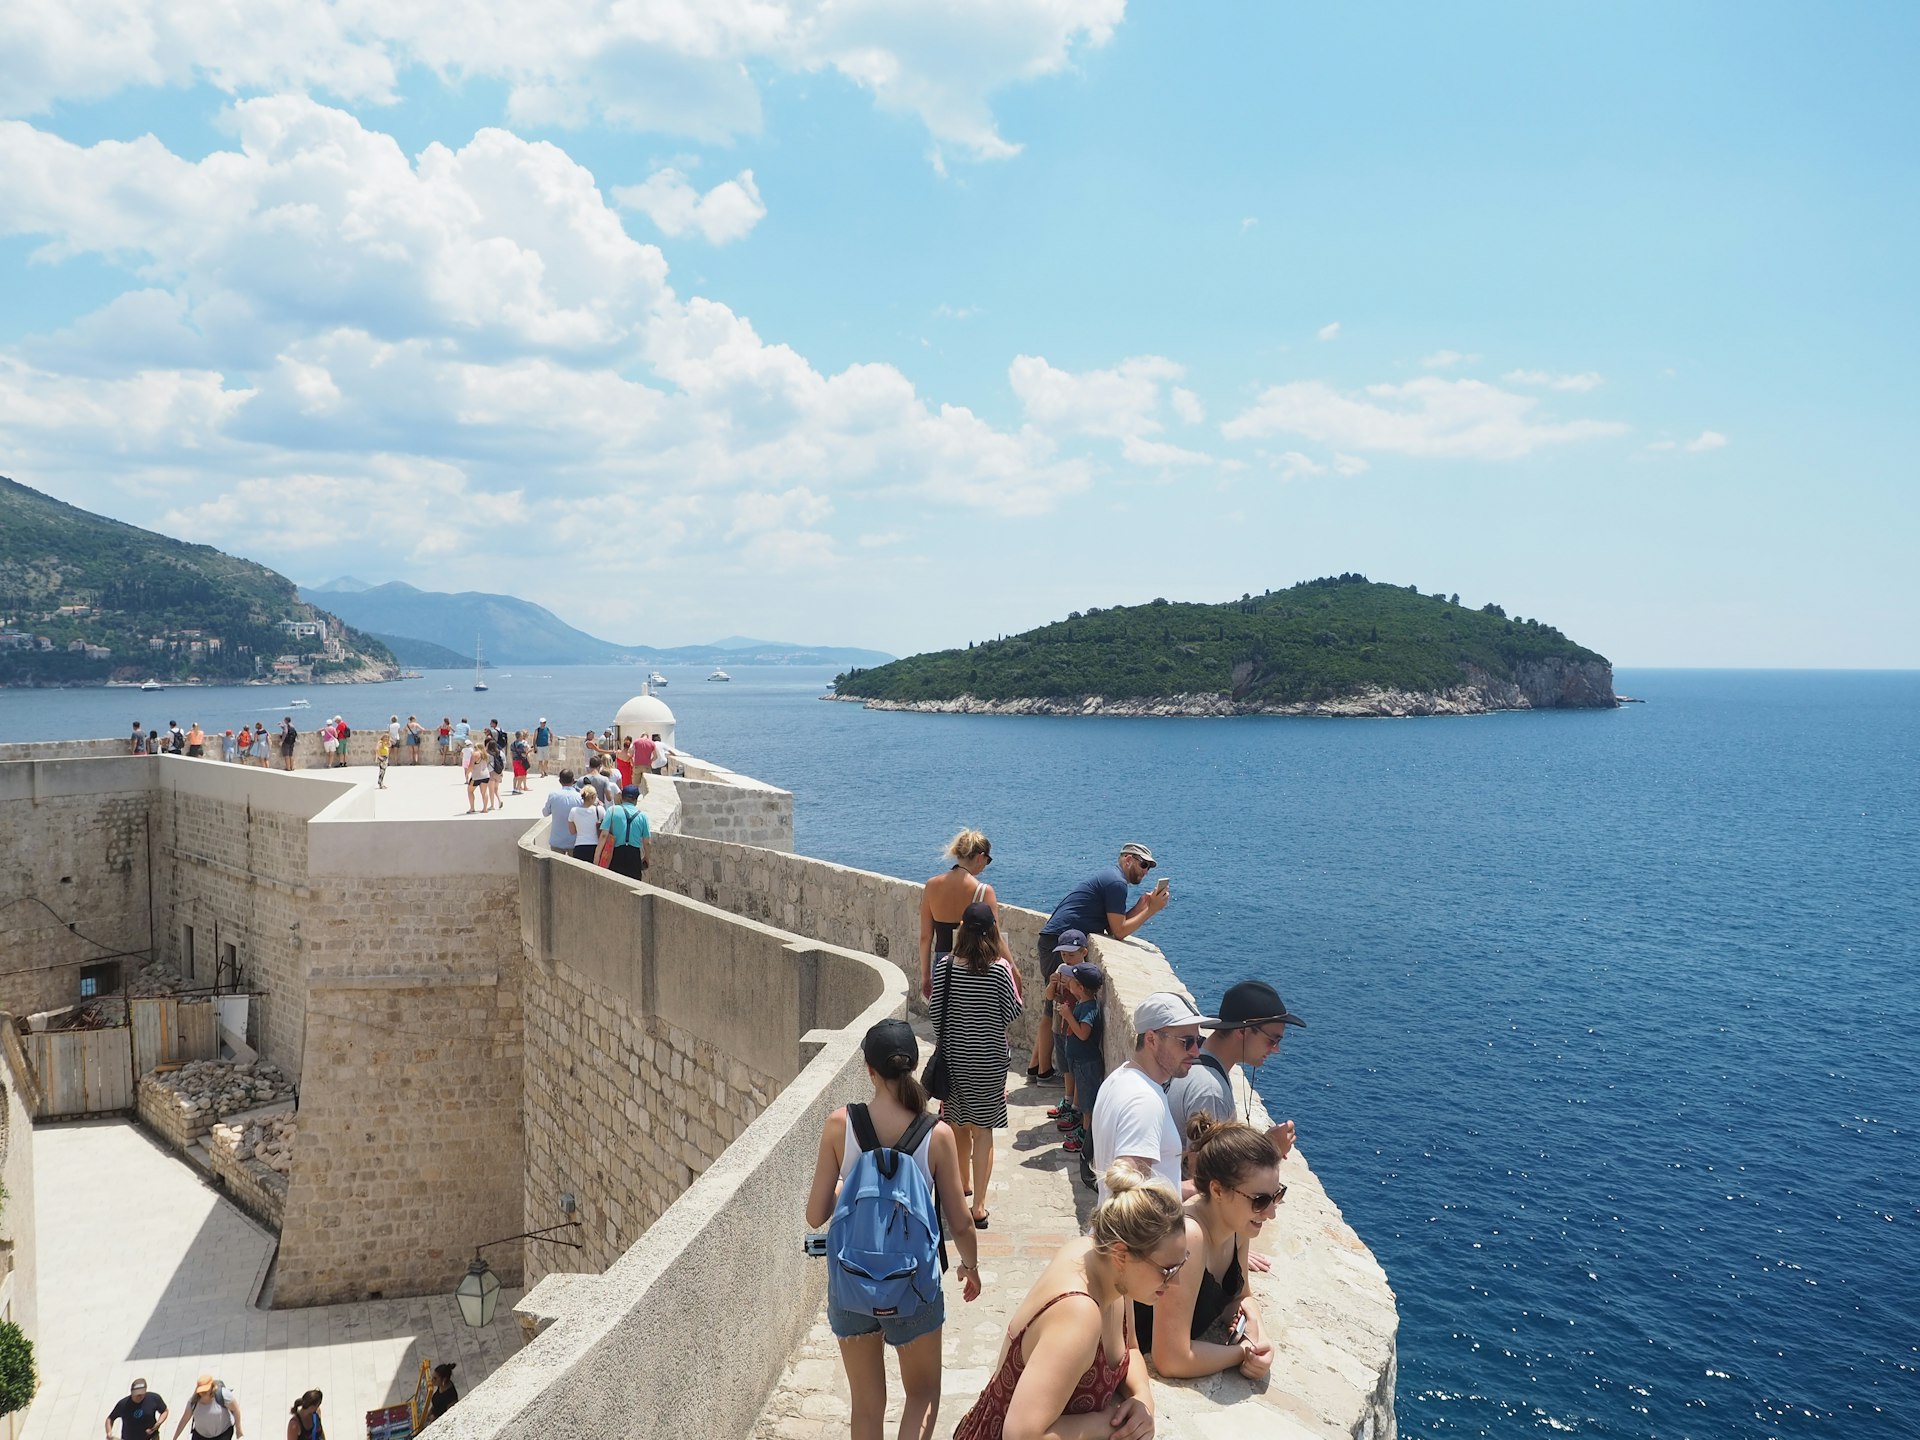 Visitors on the city wall in Dubrovnik's Old Town on a sunny day.